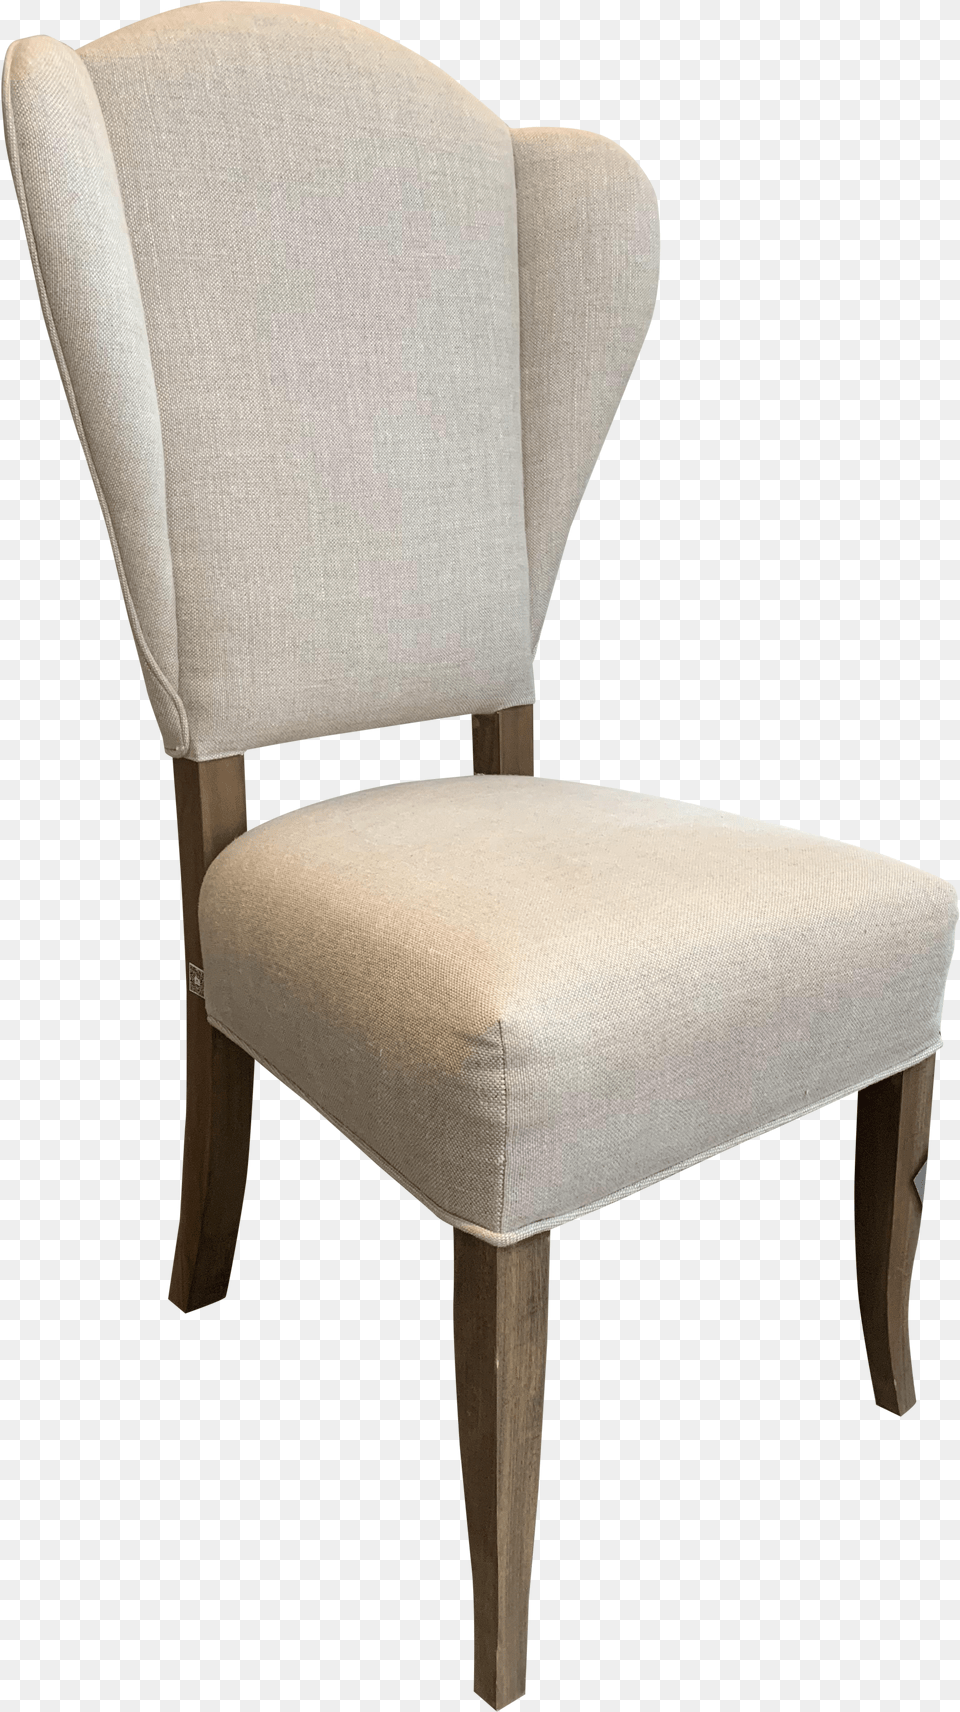 King Tall Back Dining Chair Chair Png Image